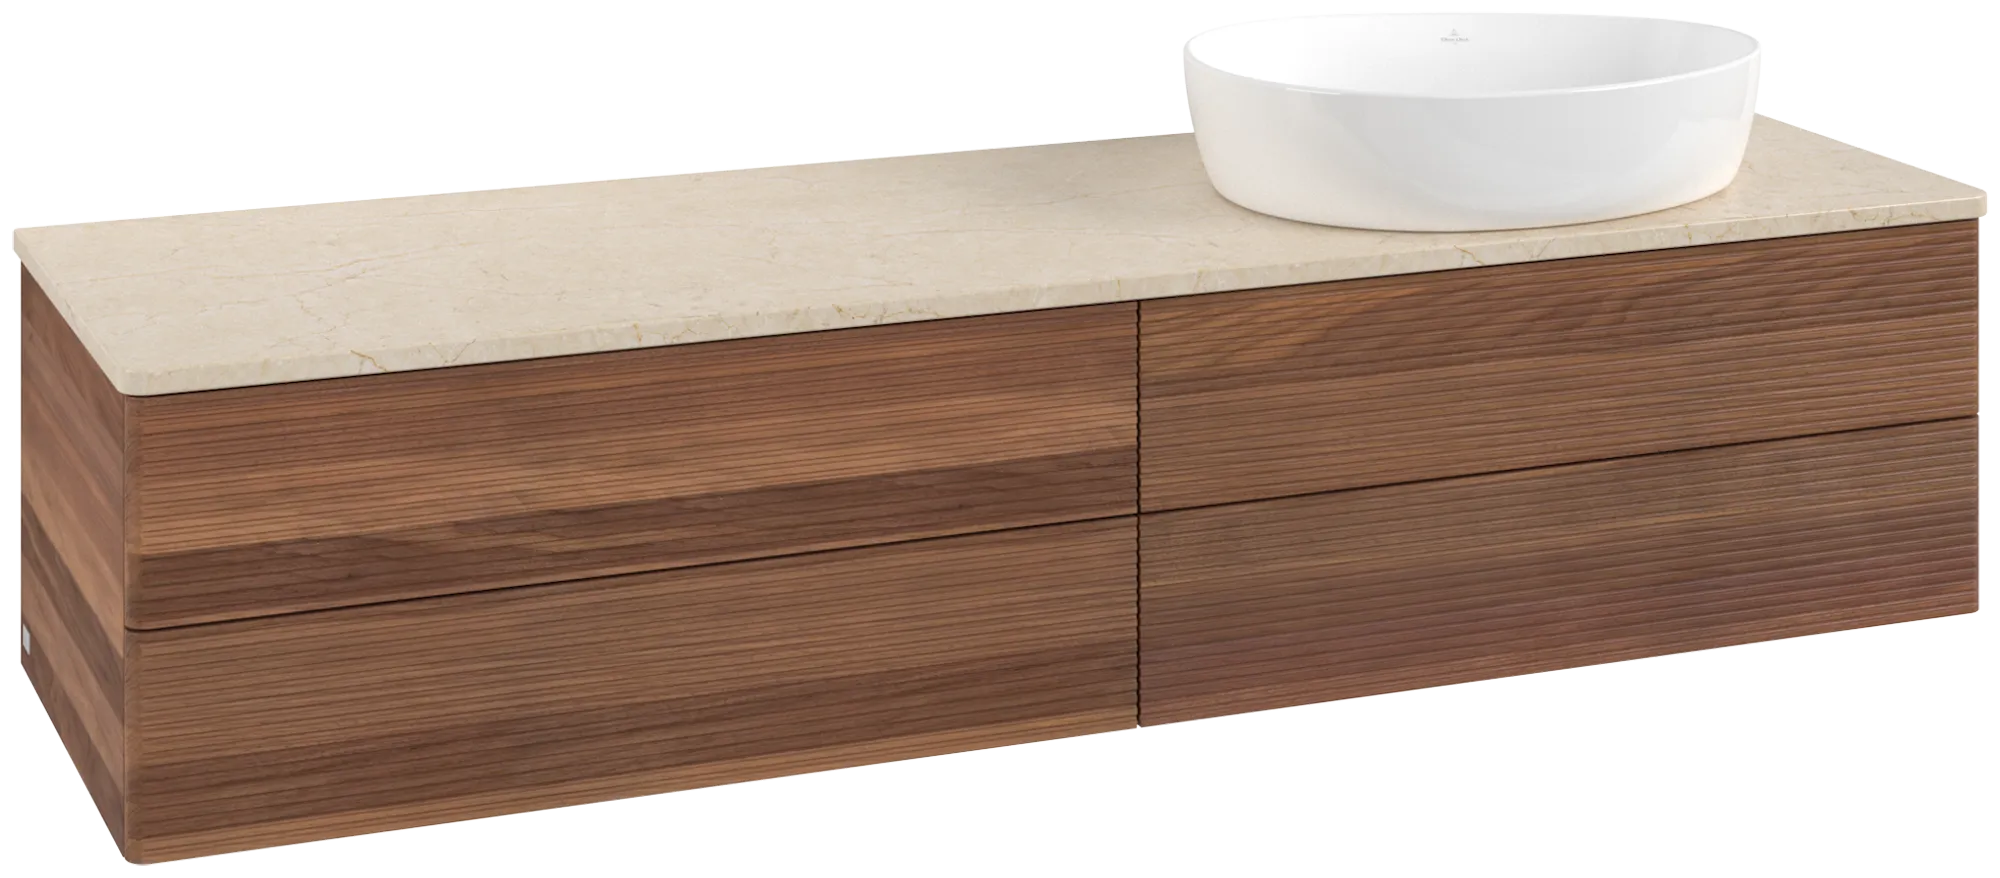 Obrázek VILLEROY BOCH Antao Vanity unit, 4 pull-out compartments, 1600 x 360 x 500 mm, Front with grain texture, Warm Walnut / Botticino #K27113HM